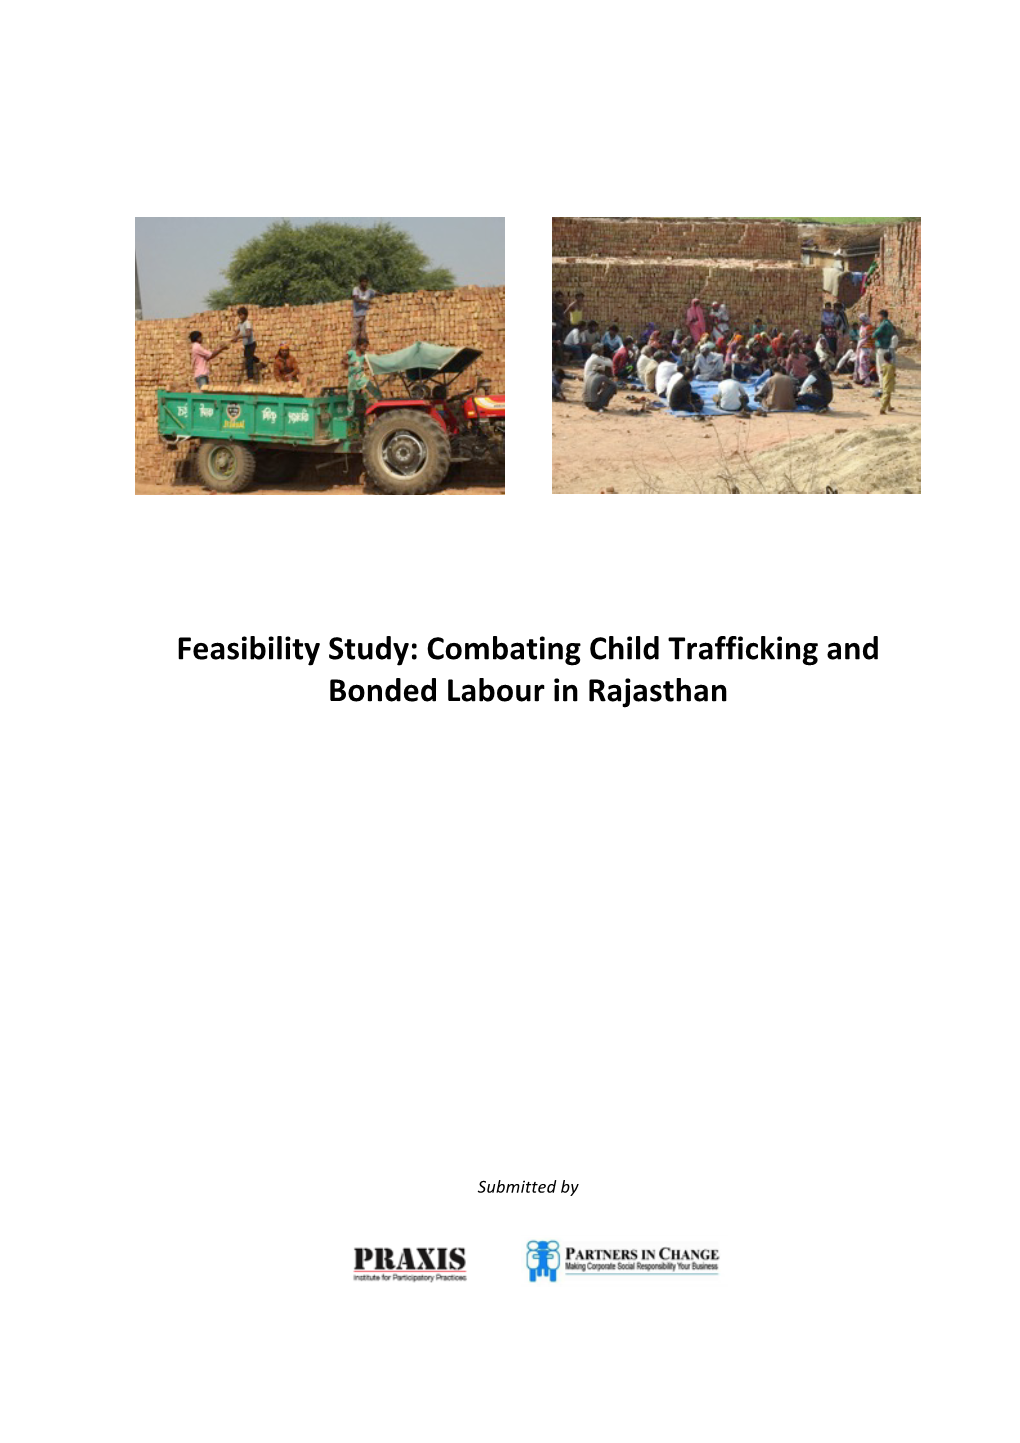 Combating Child Trafficking and Bonded Labour in Rajasthan